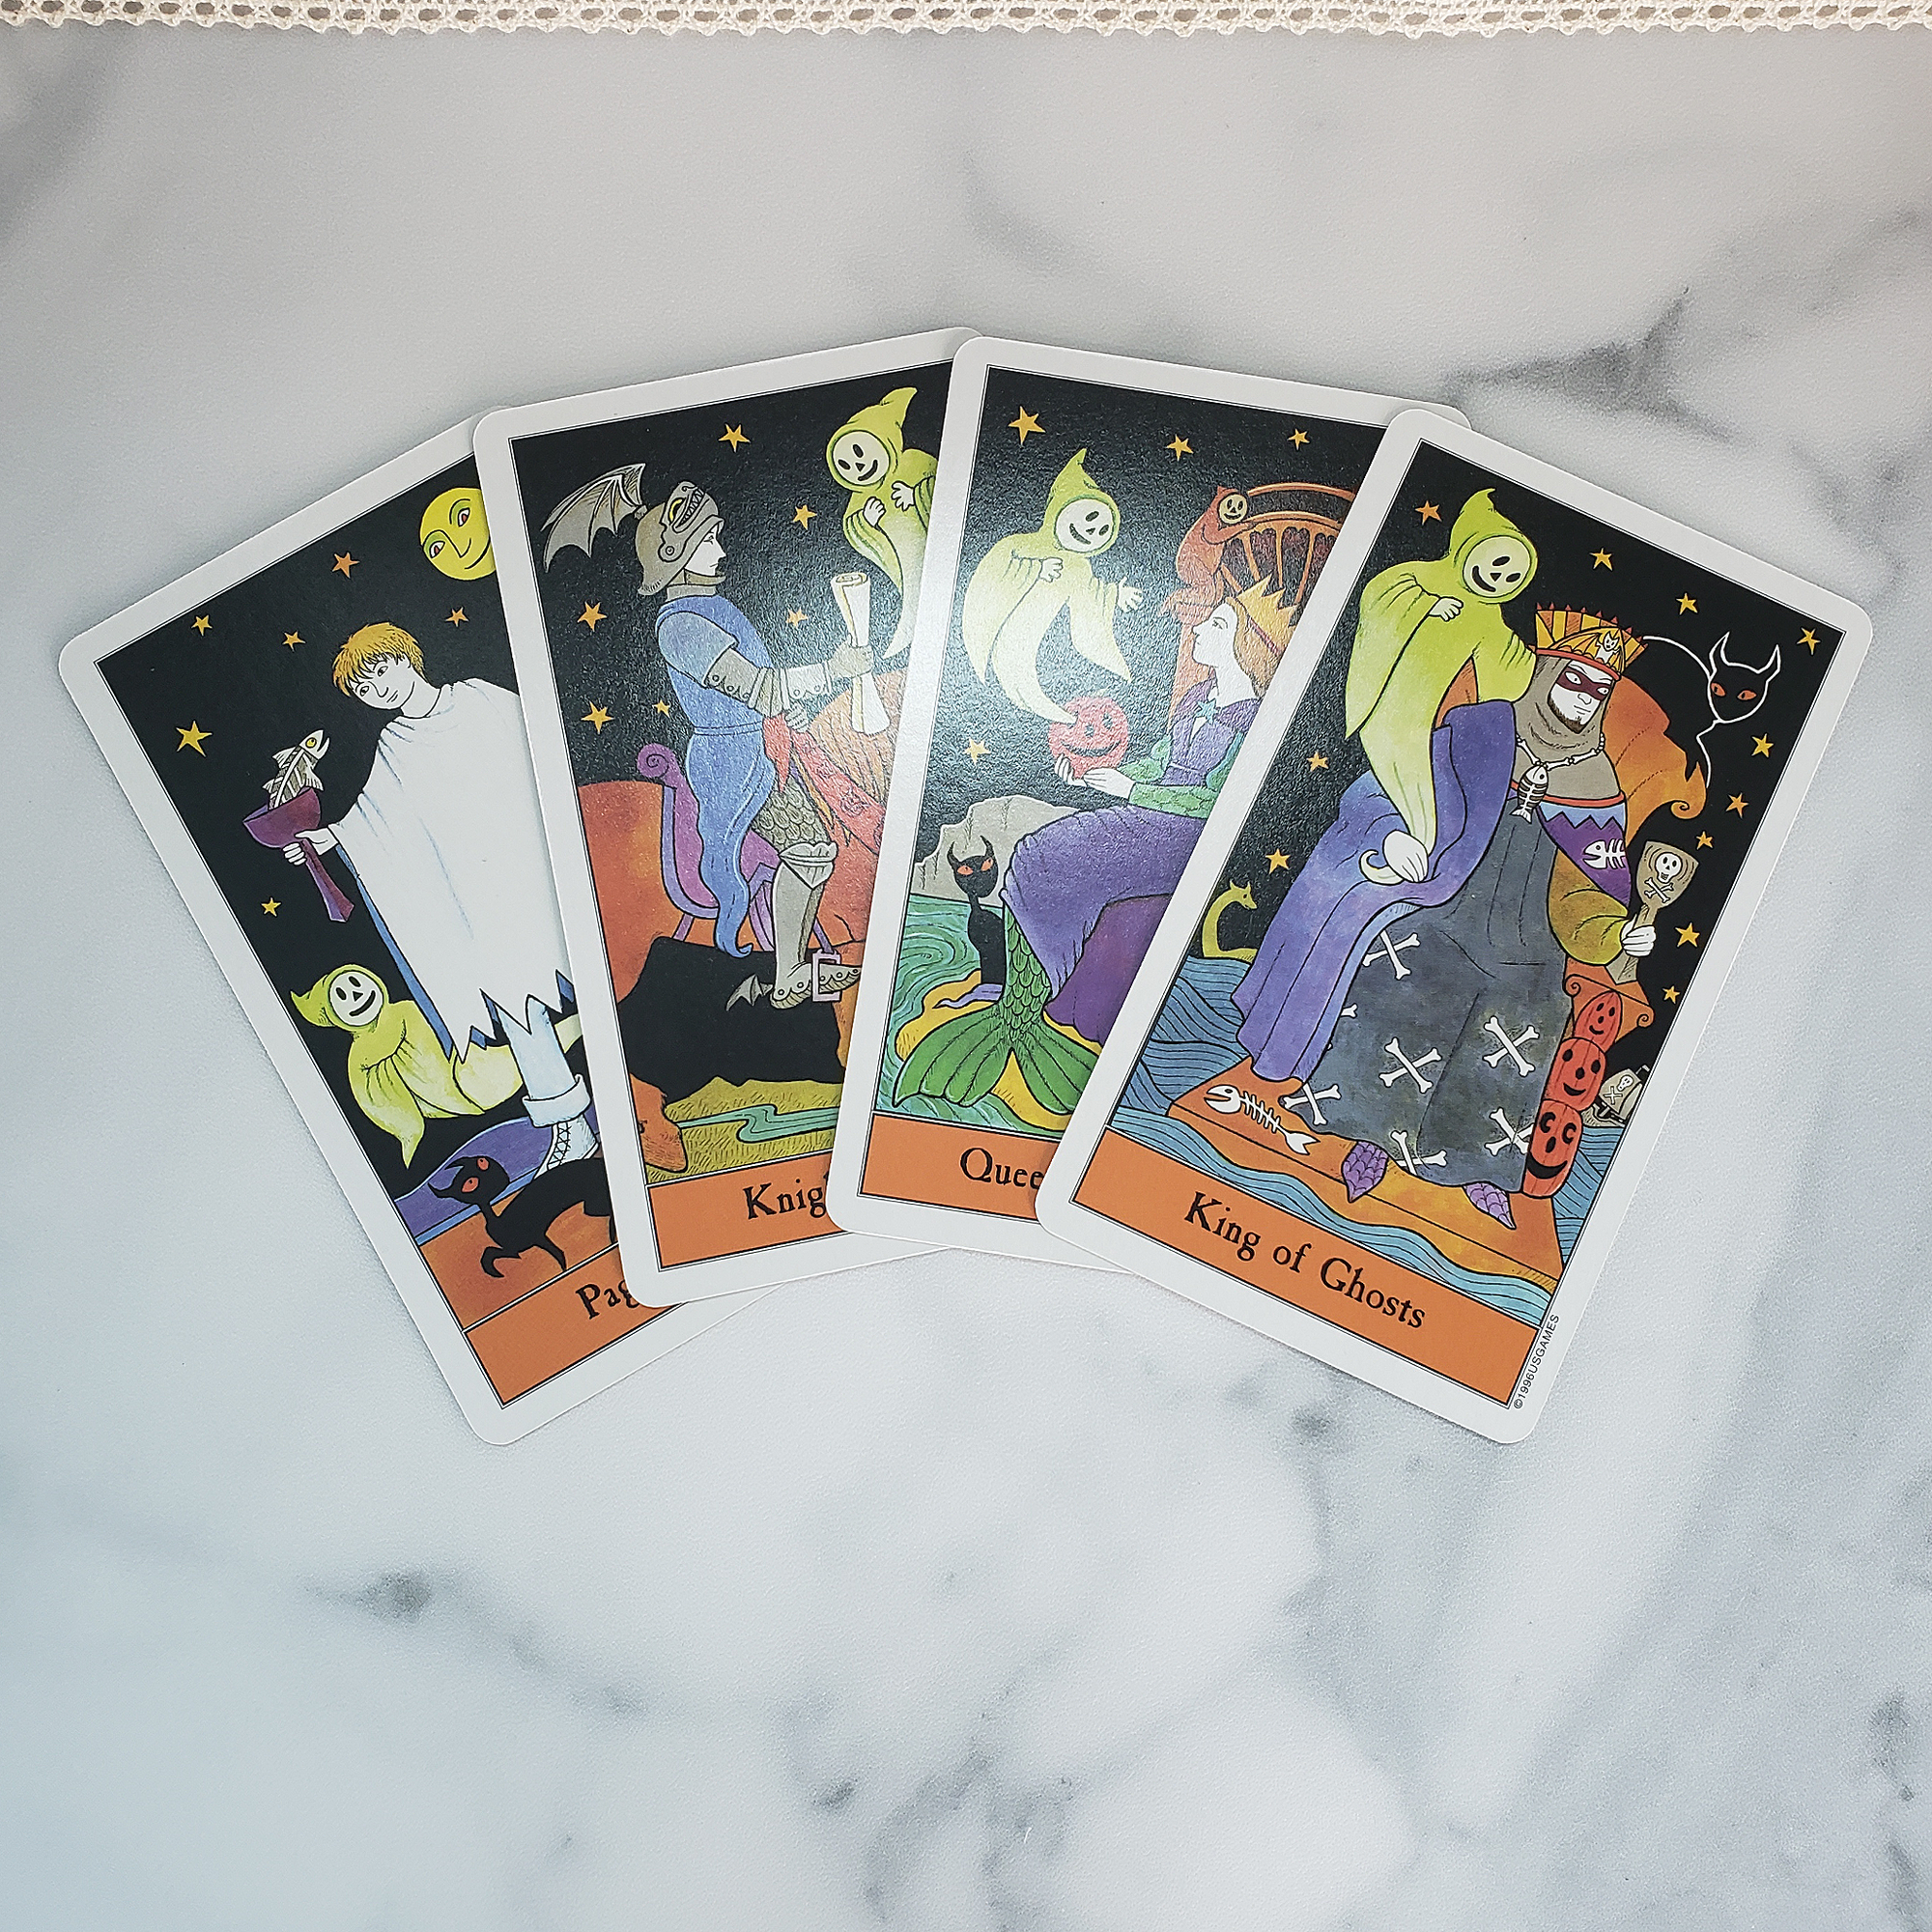 The Halloween Tarot Deck | Set of Tarot Cards | Divination Tool - Suit of Ghosts, Alternative to Suit of Cups